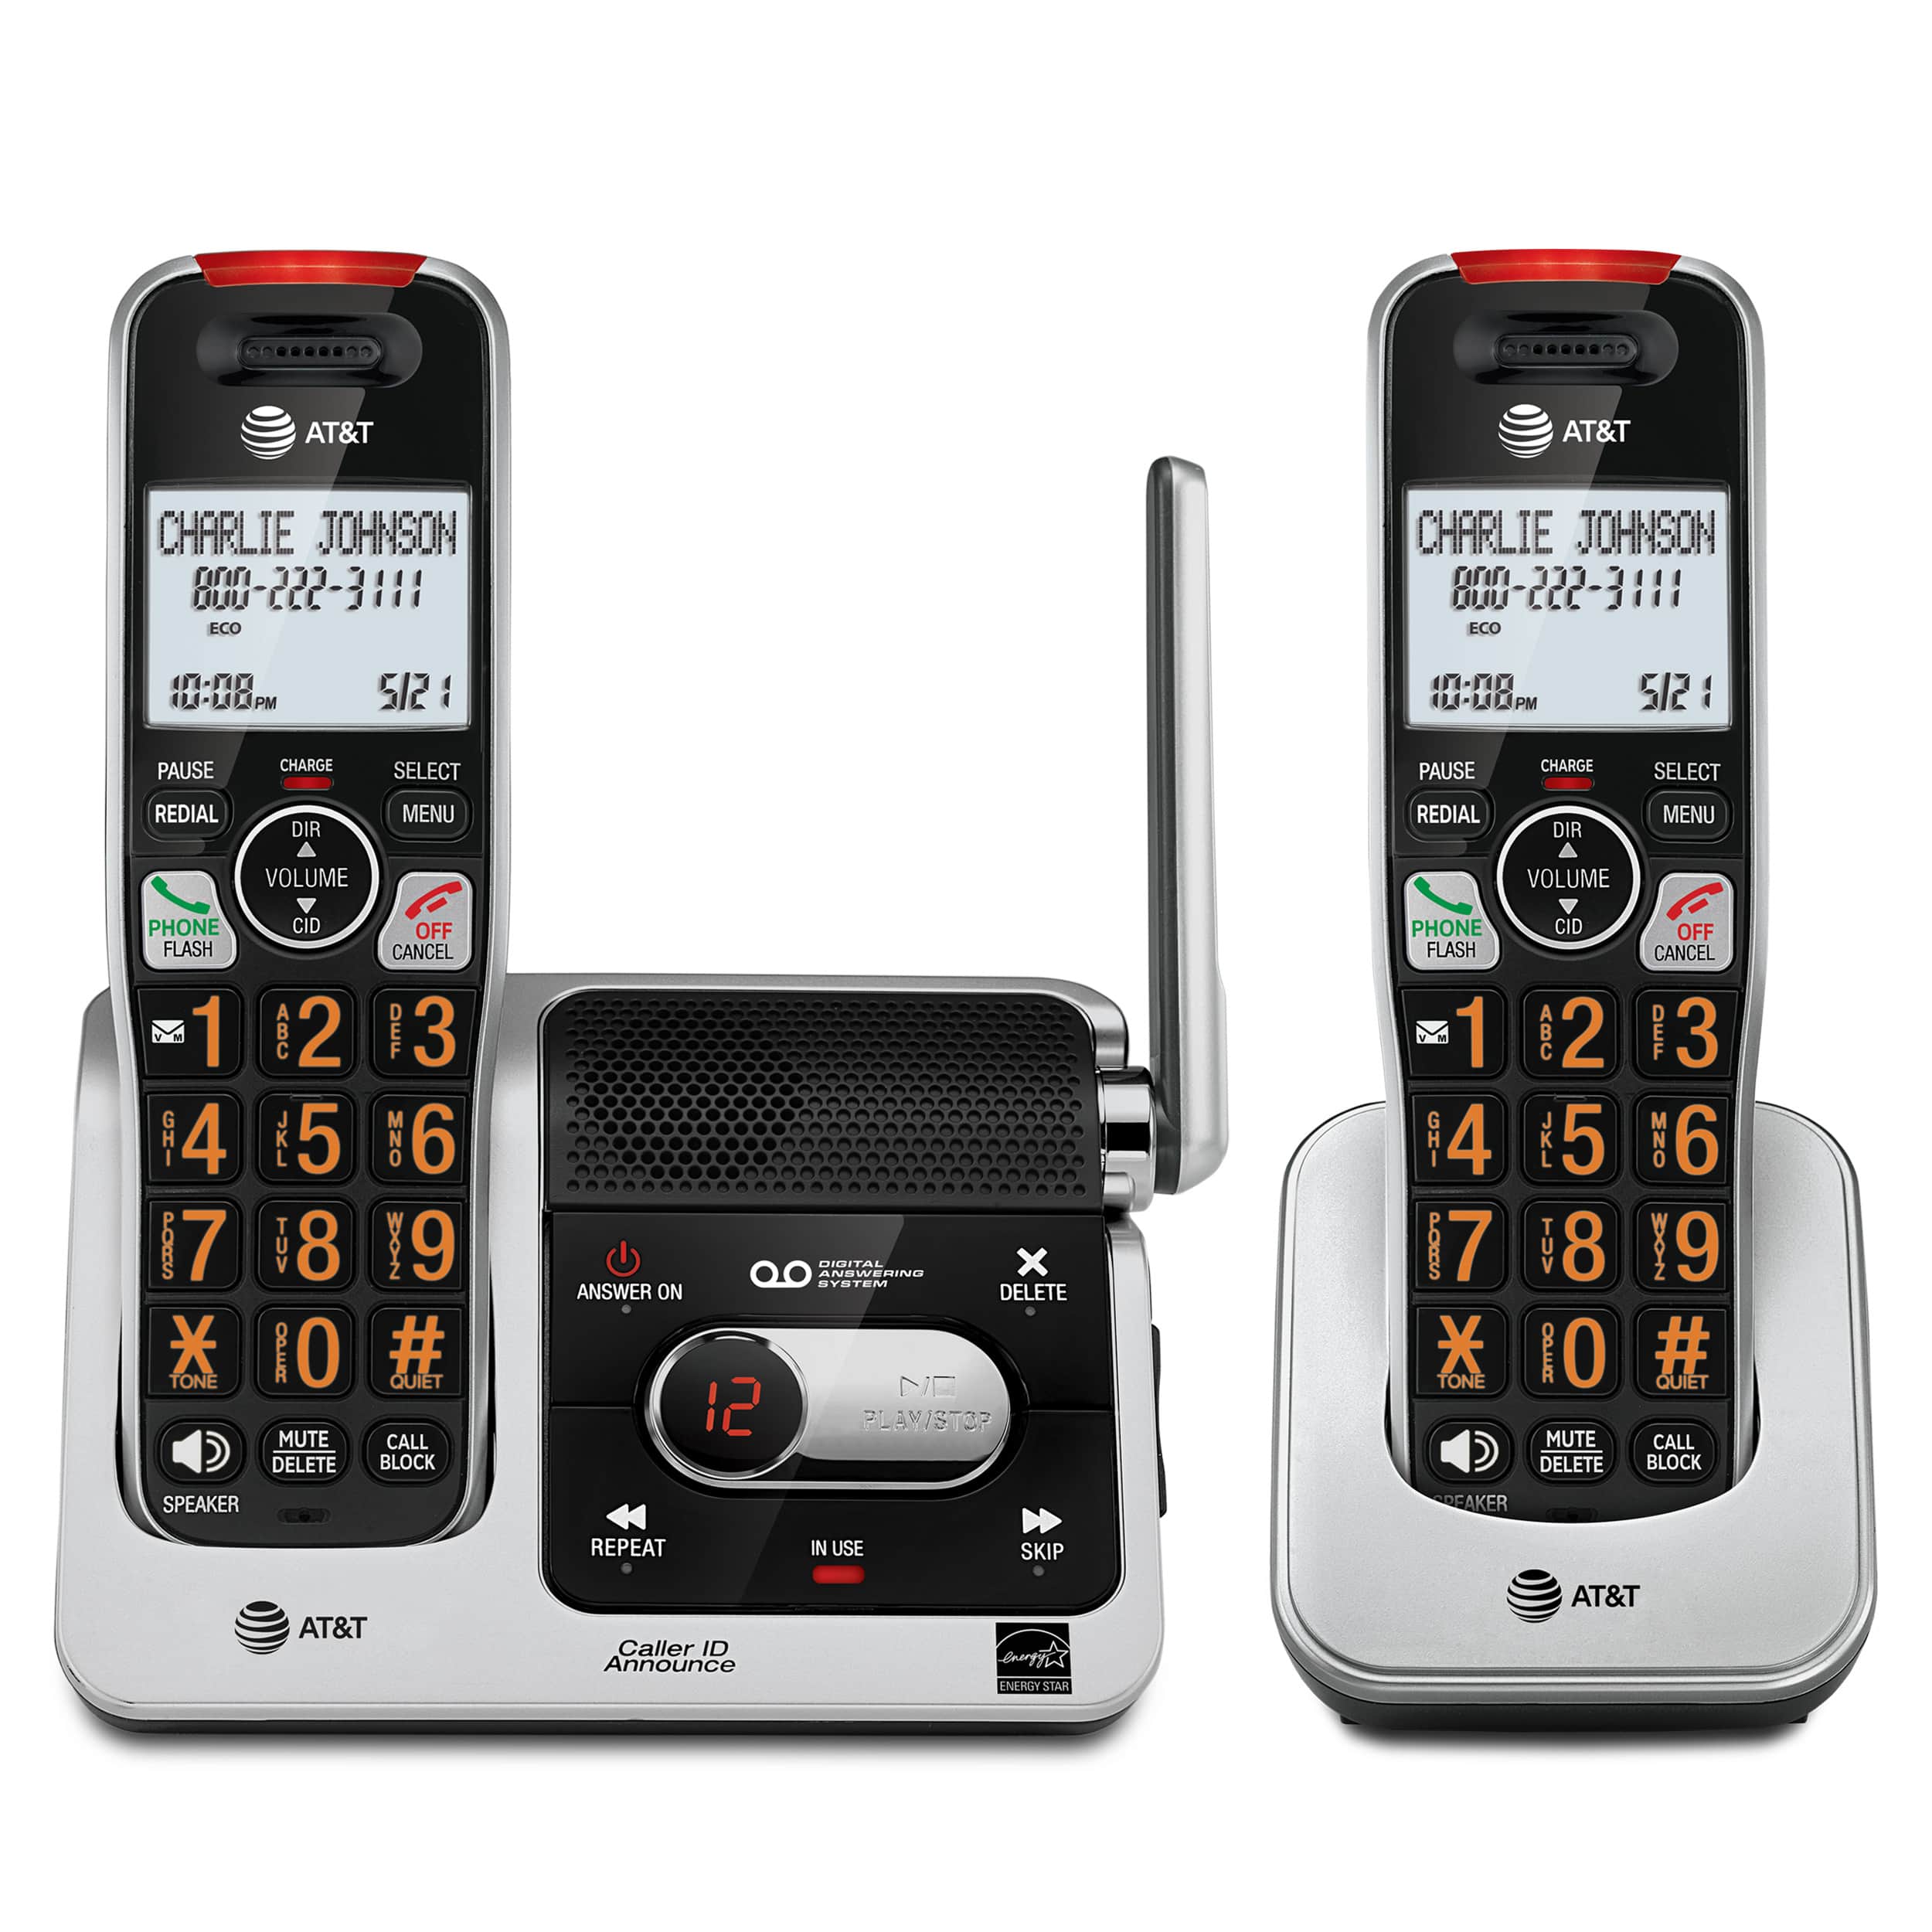 2-Handset Cordless Phone with Unsurpassed Range, Smart Call Blocker and Answering System - view 1